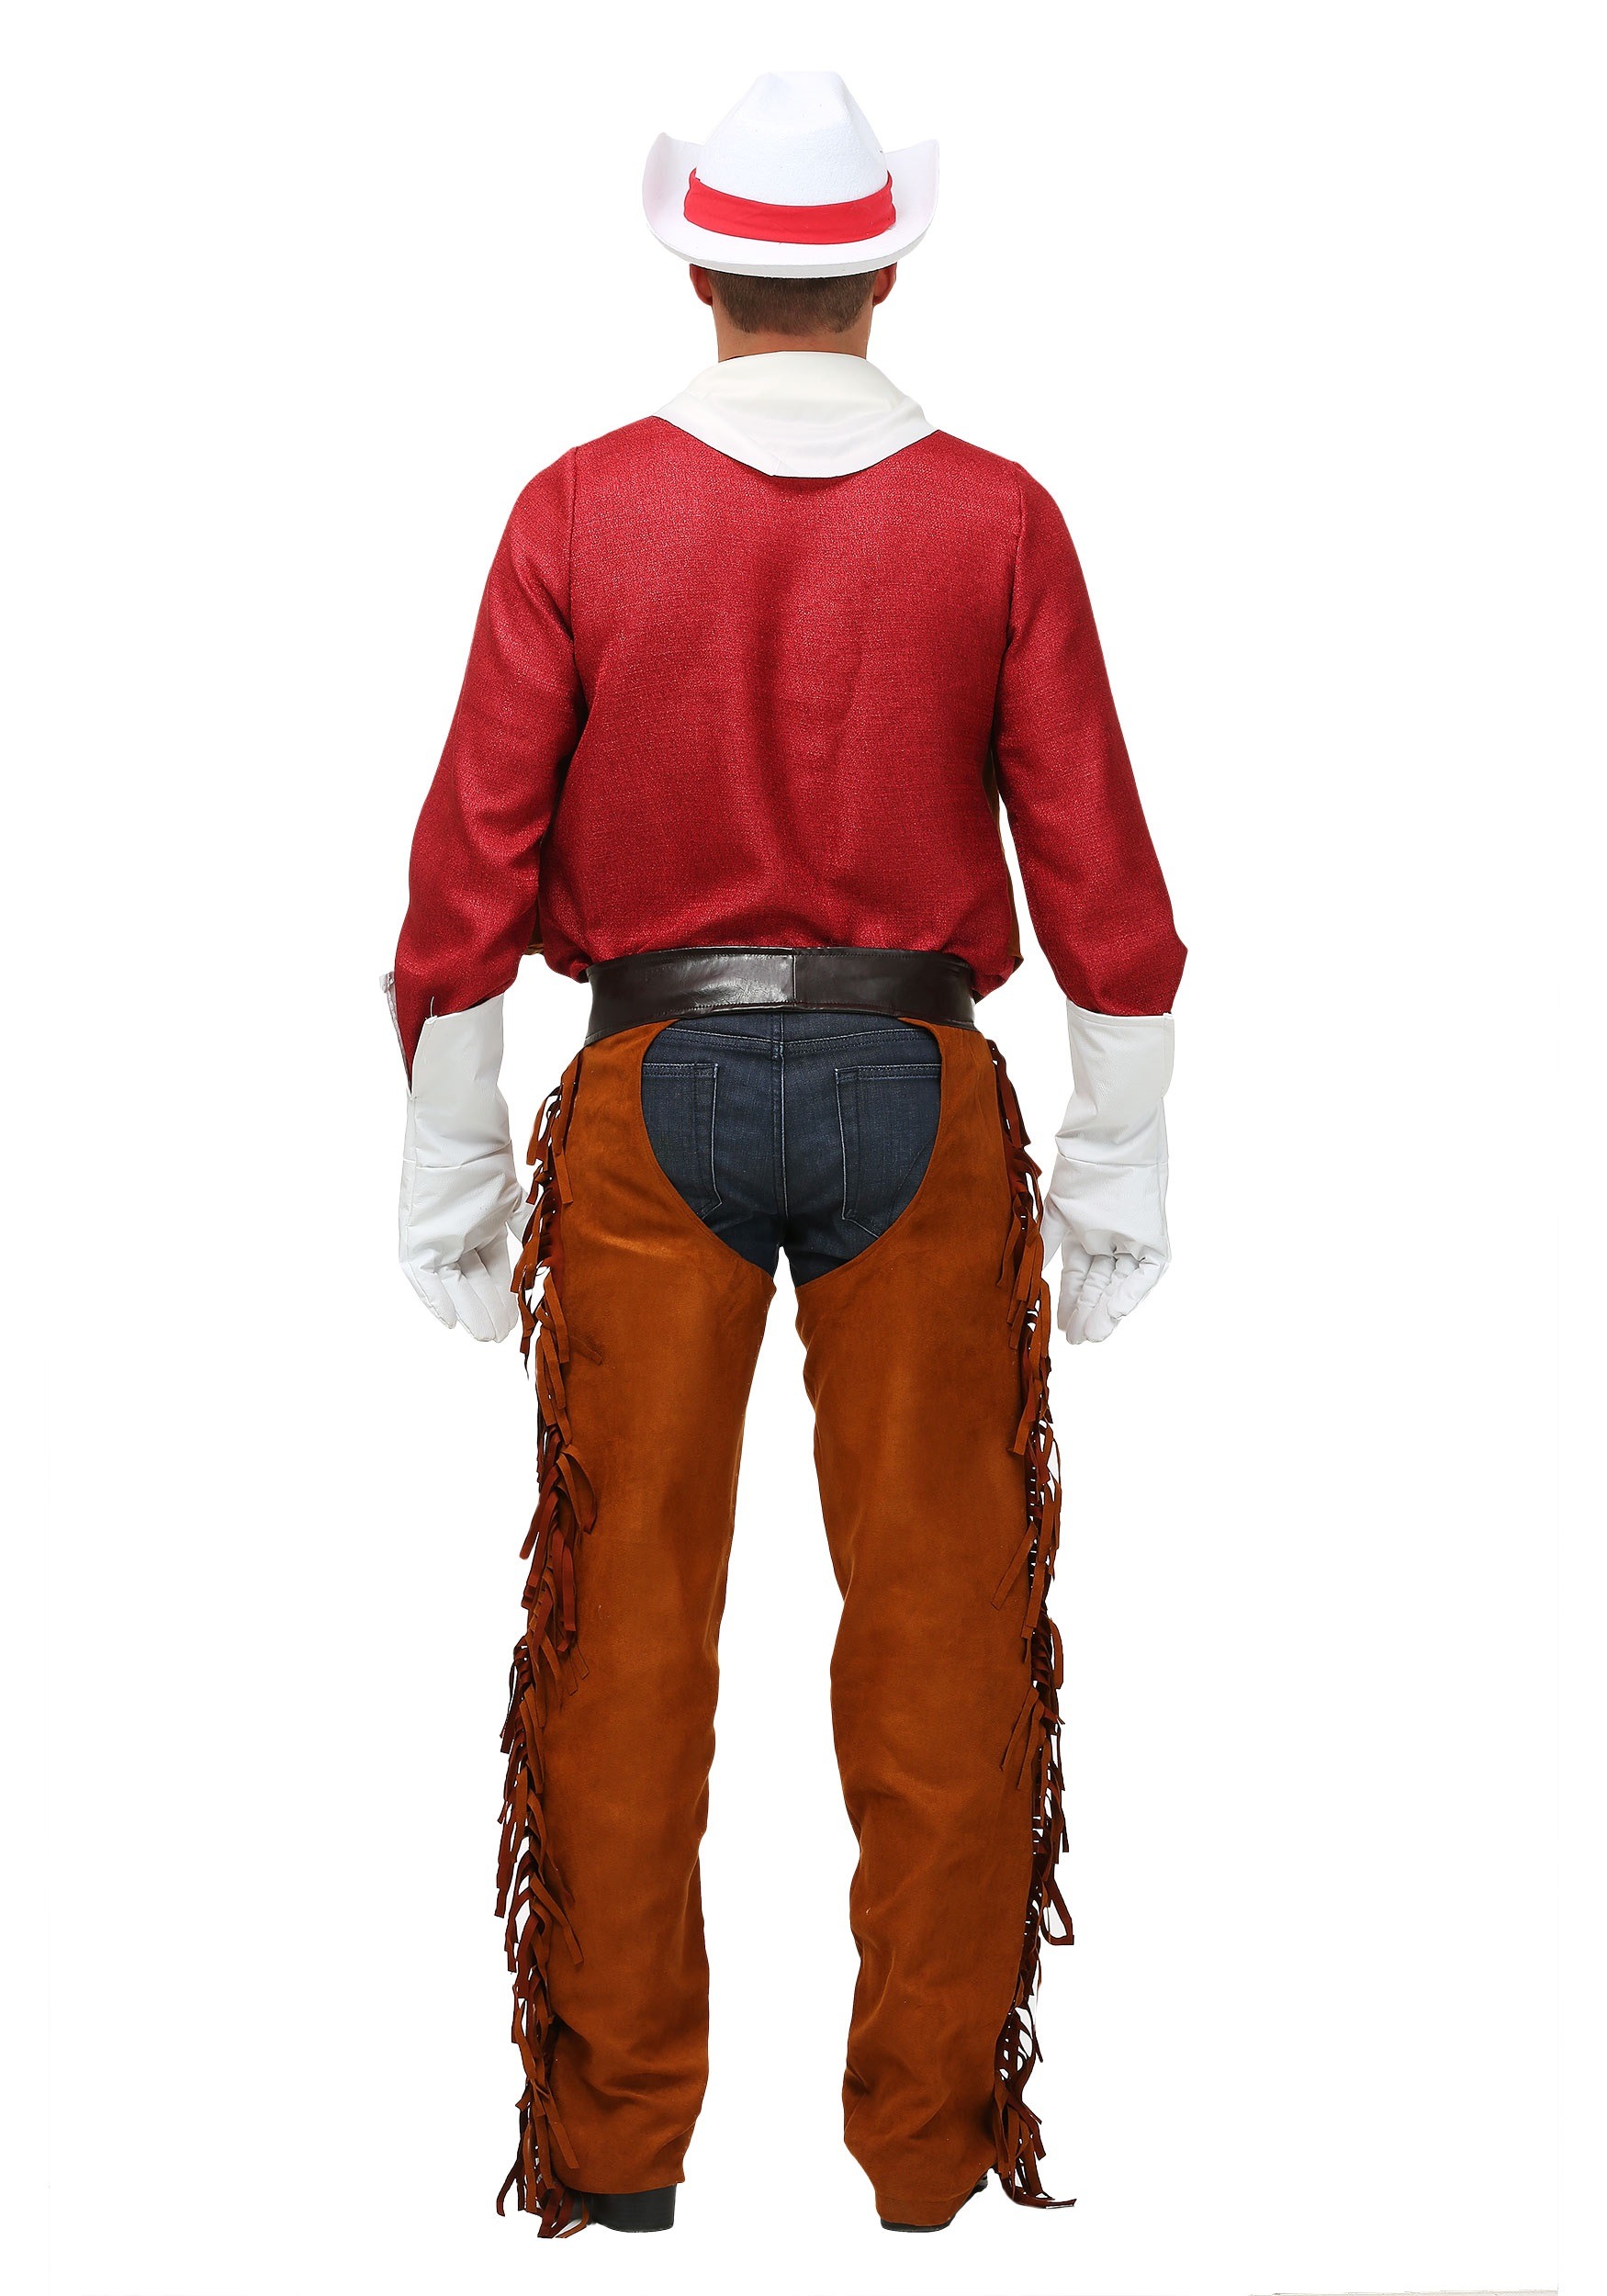 Exclusive Adult Rodeo Cowboy Costume